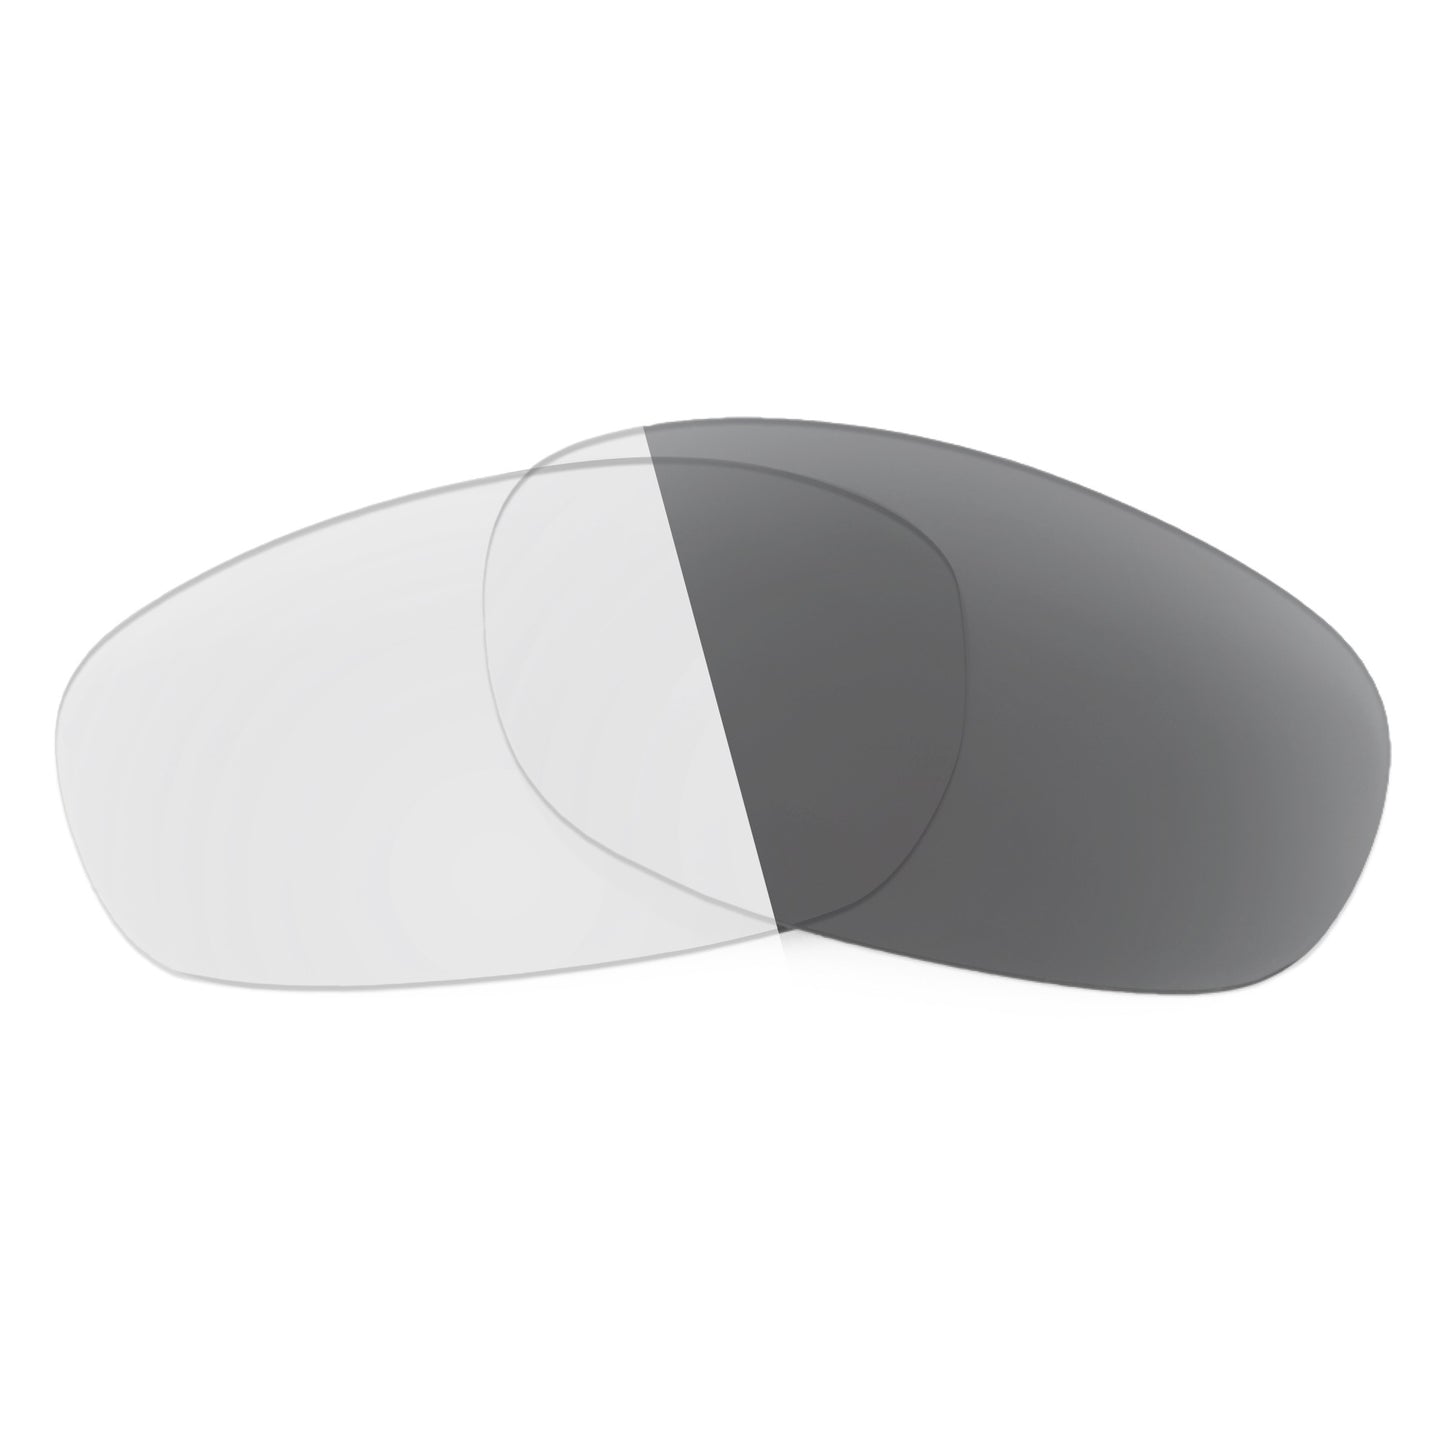 Revant replacement lenses for Ray-Ban RB3492 62mm Non-Polarized Adapt Gray Photochromic